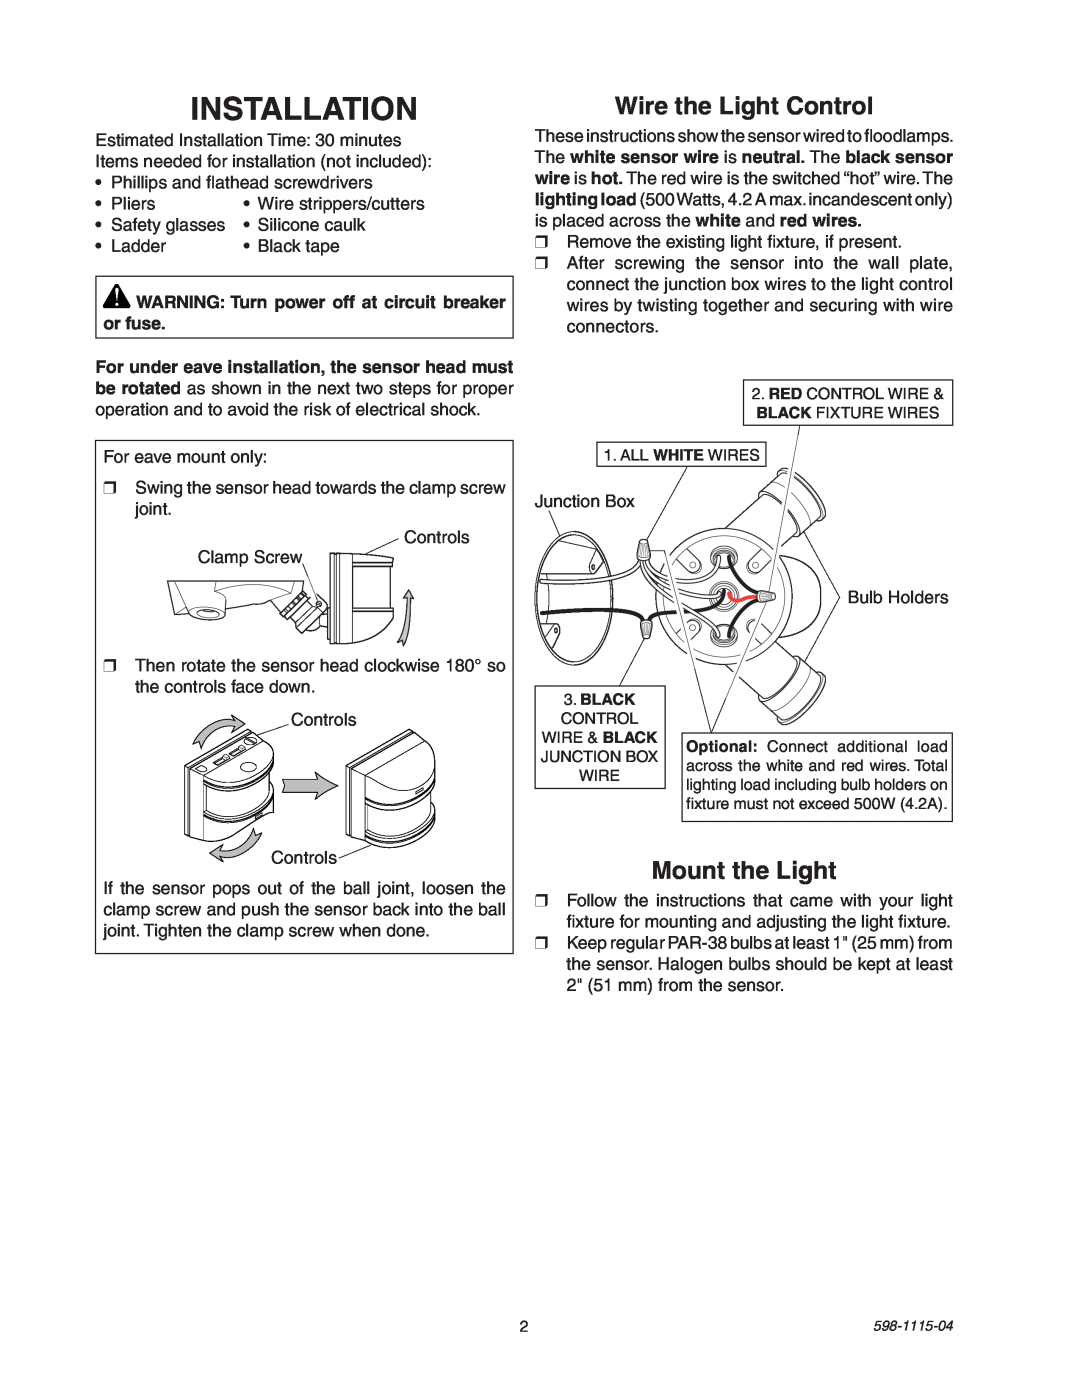 Heath Zenith 2LBN3 manual Installation, Wire the Light Control, Mount the Light 